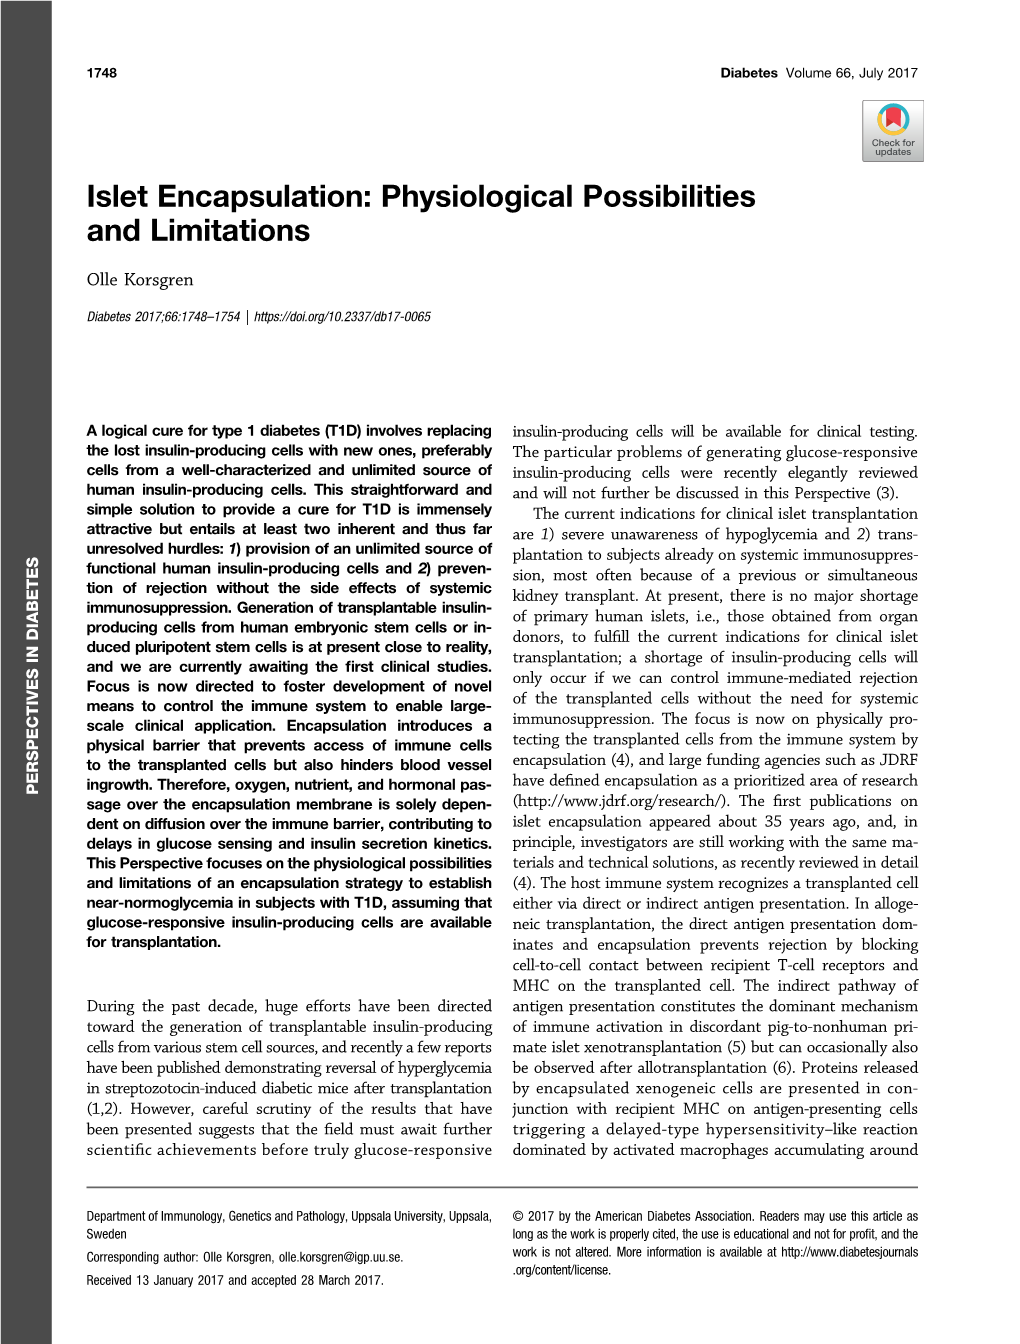 Islet Encapsulation: Physiological Possibilities and Limitations